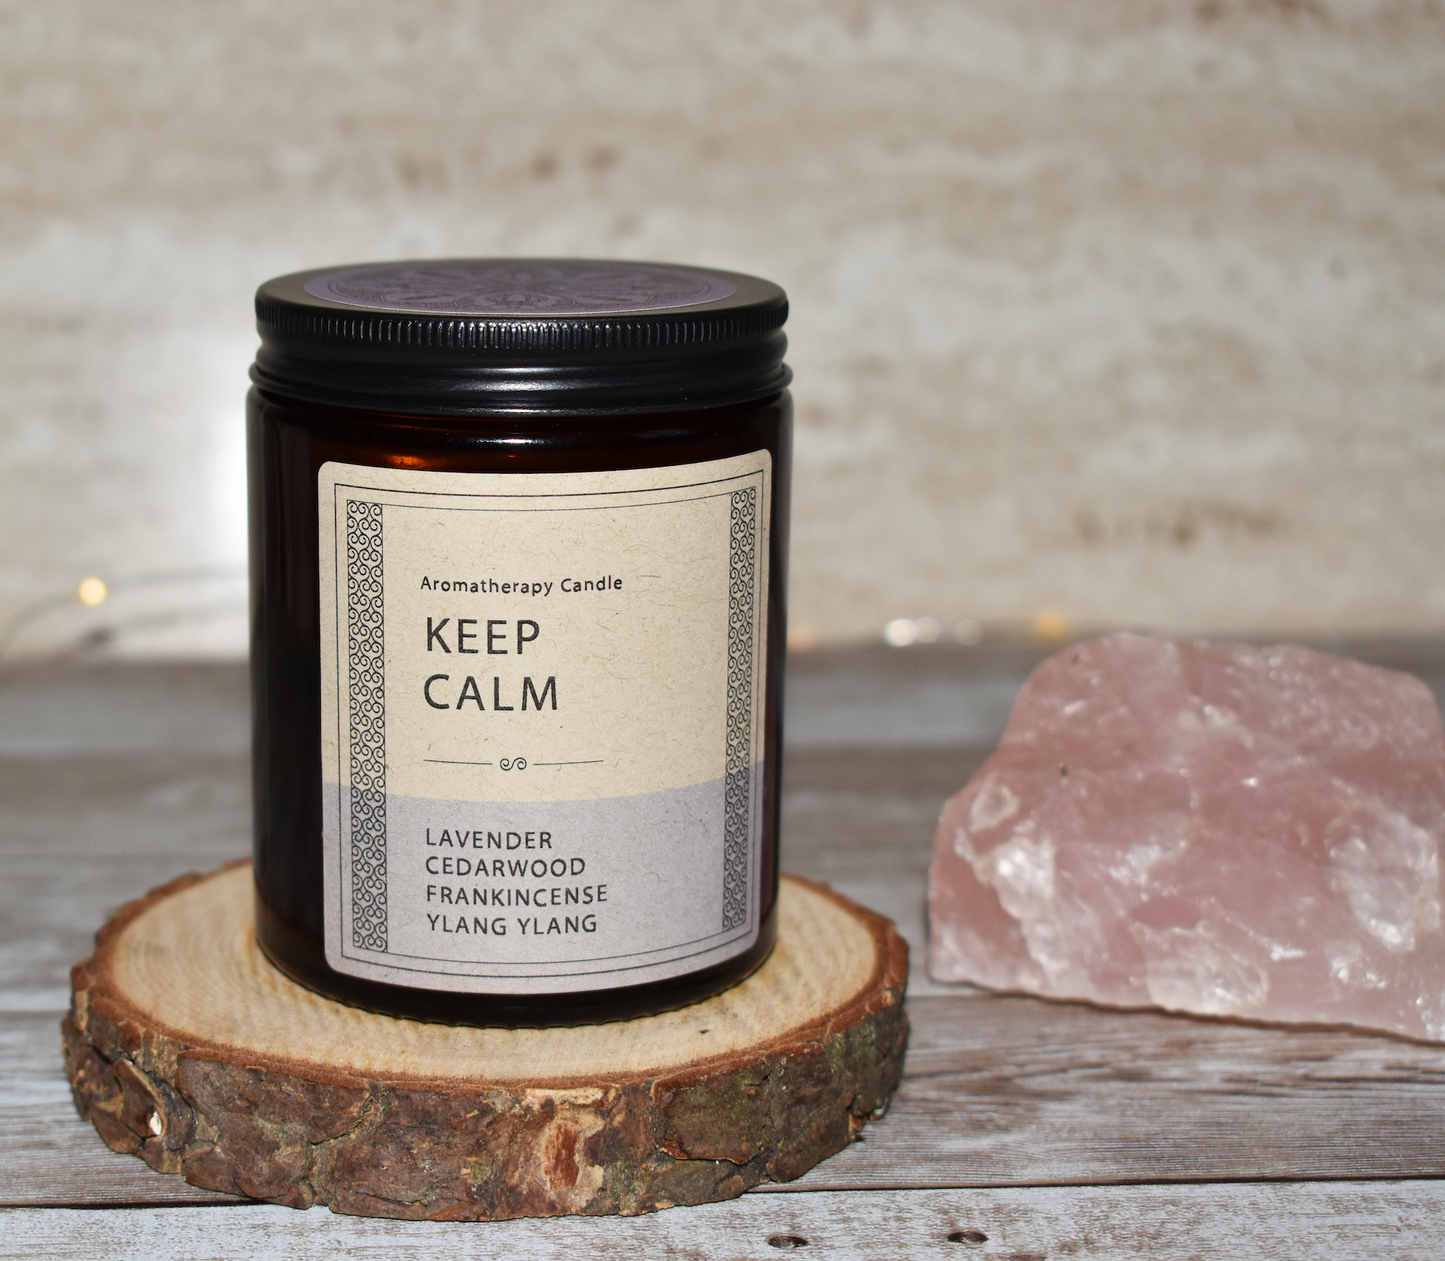 Embrace Tranquility: "Keep Calm" Aromatherapy Candle with Lavender, Frankincense, Cedarwood & Ylang Ylang Essential Oils